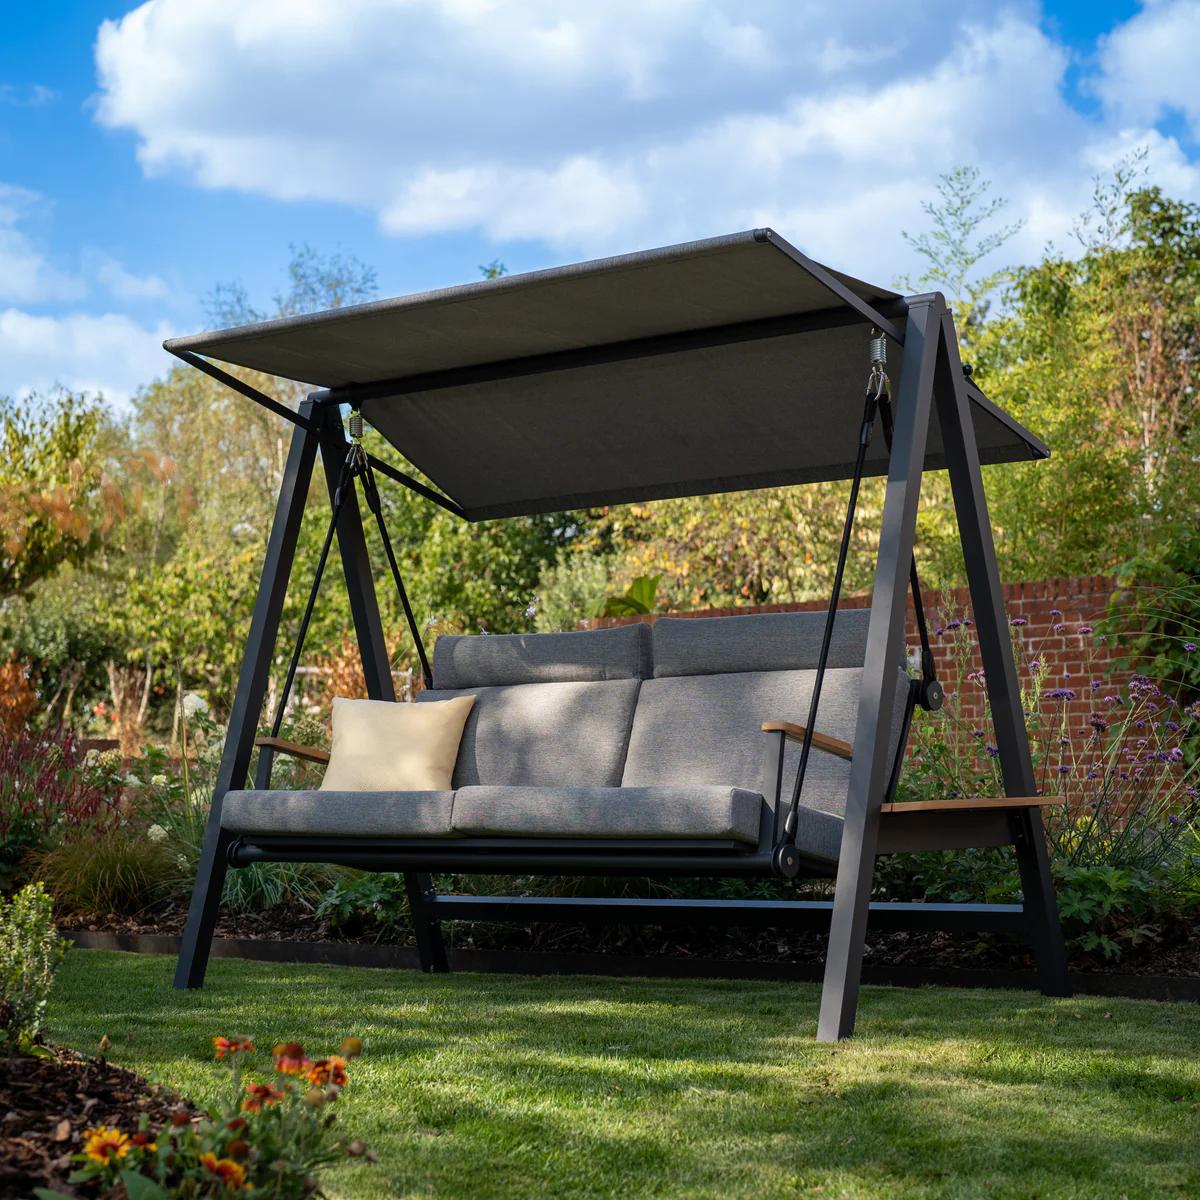 Product Lima Deluxe Aluminium Swing Seat | Nuvo Outdoor Living image